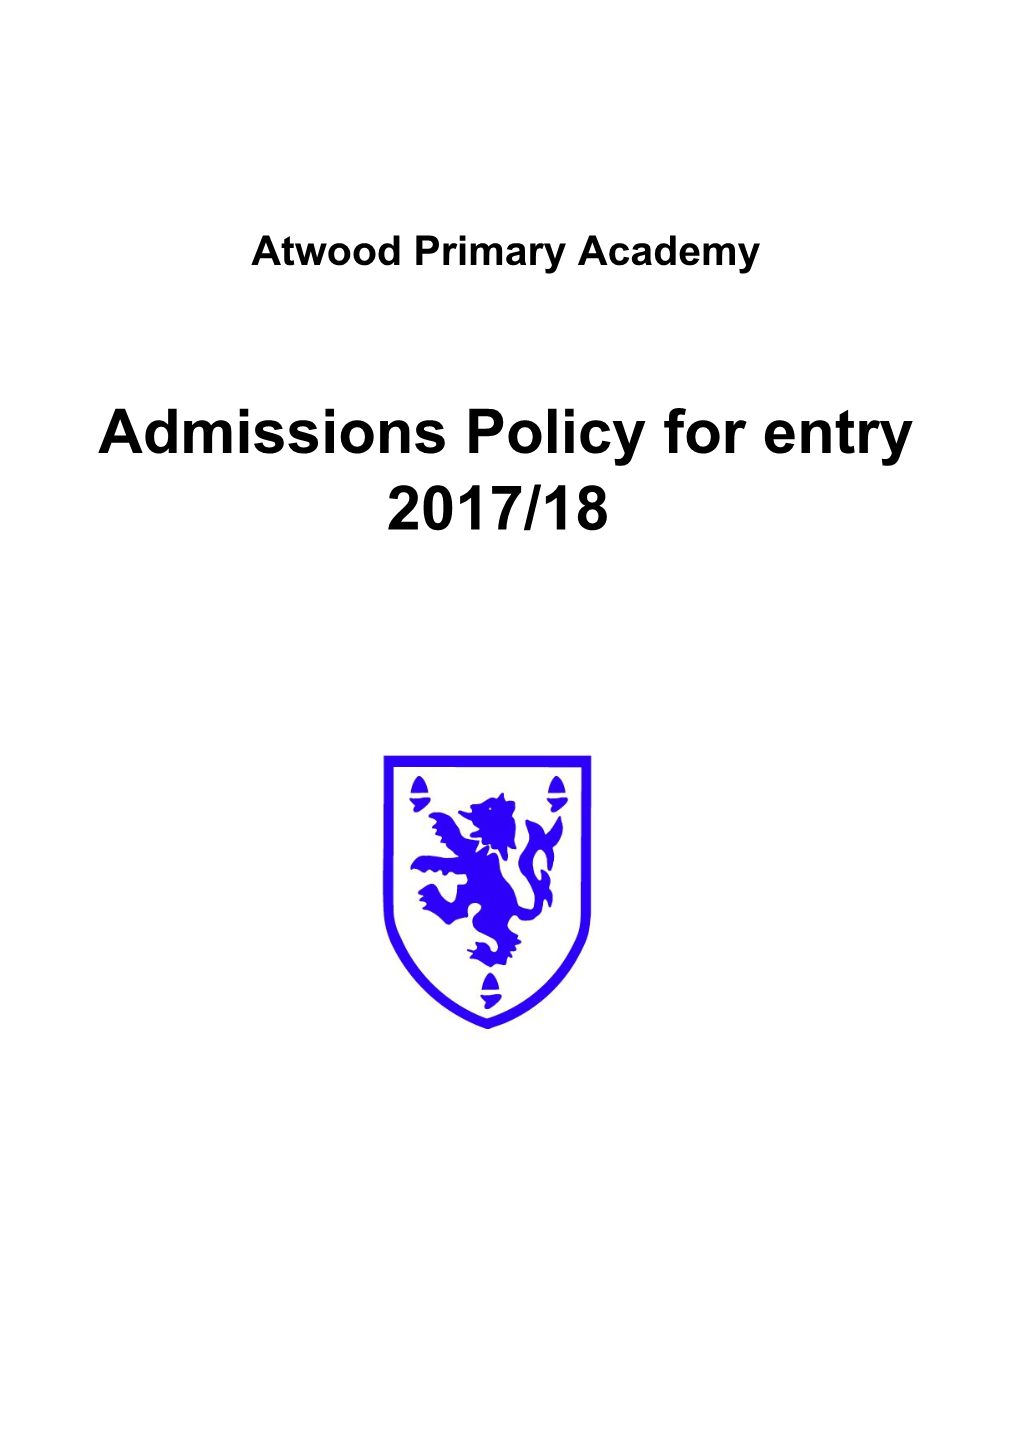 Atwood - Admission Policy 2017 - 2018